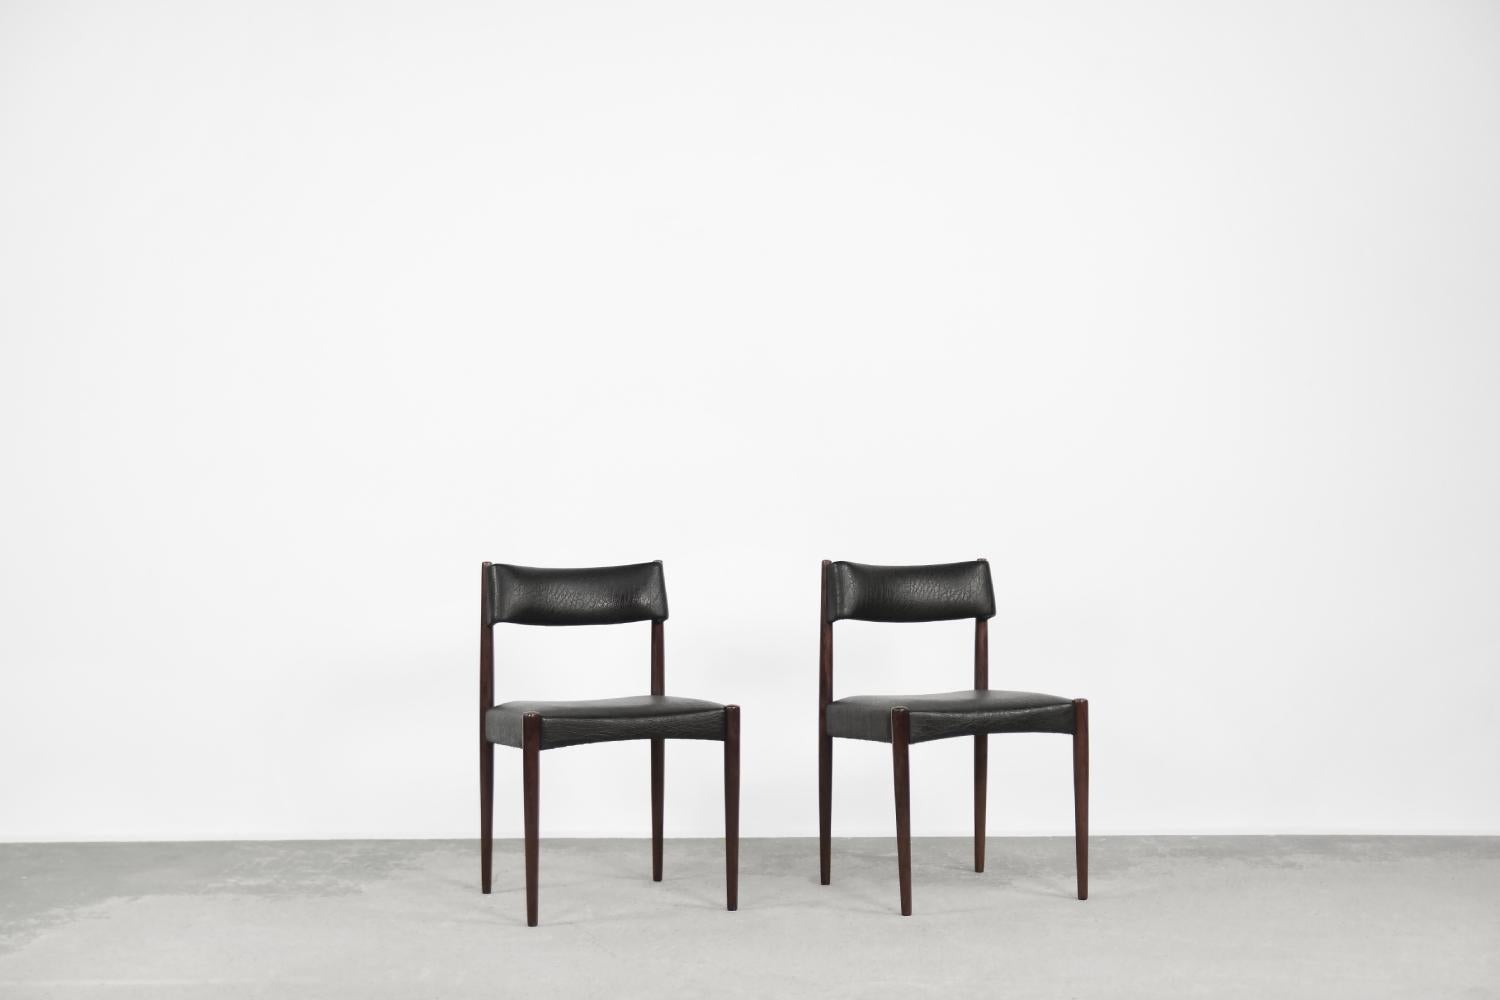 This set of two elegant dining chairs was designed by Aksel Bender Madsen for the Dutch manufacture Bovenkamp during the 1960s. Madsen is famous for its exquisite craftsmanship with organic forms of wood. This chairs are upholstered with black vinyl